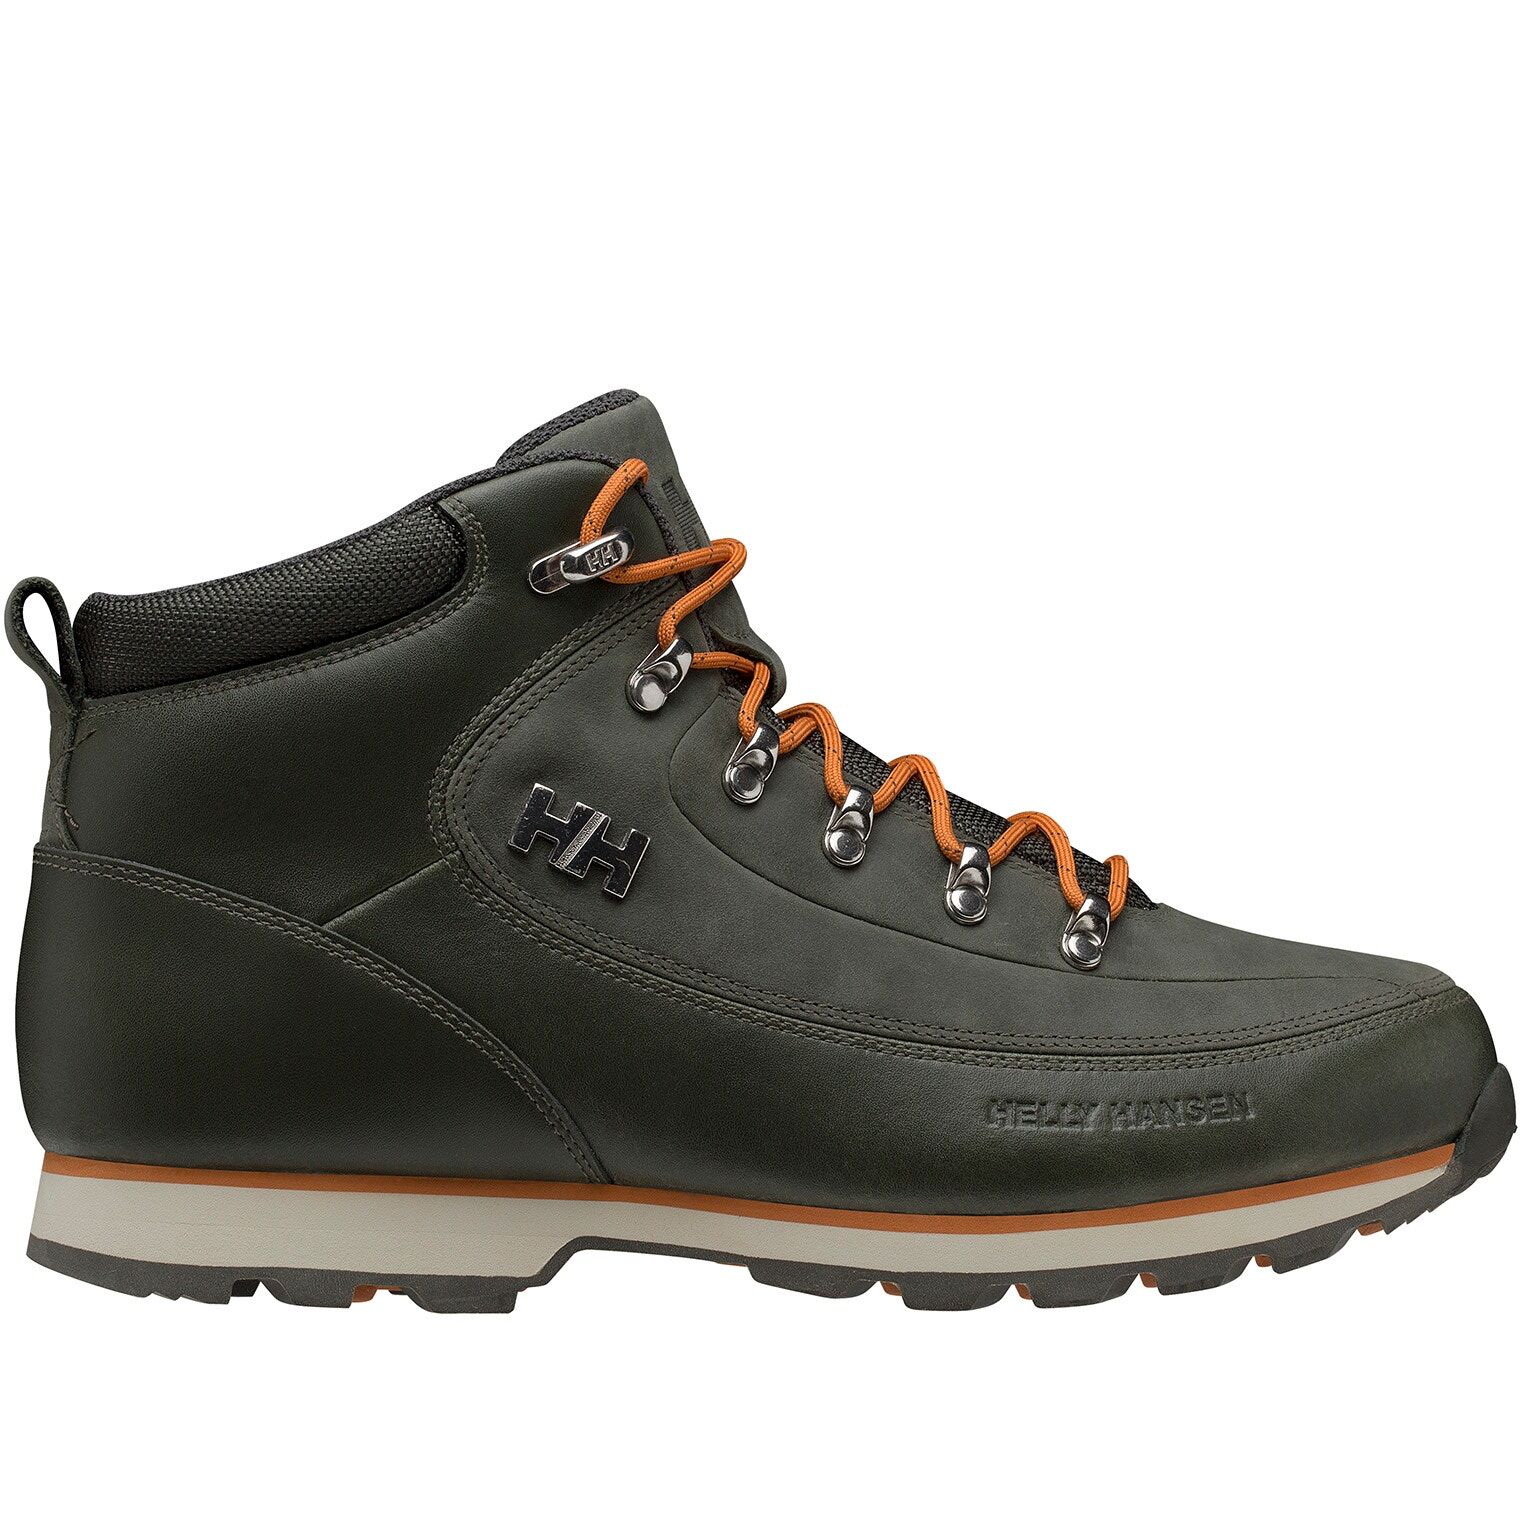 Helly Hansen The Forester - Boots - Men's